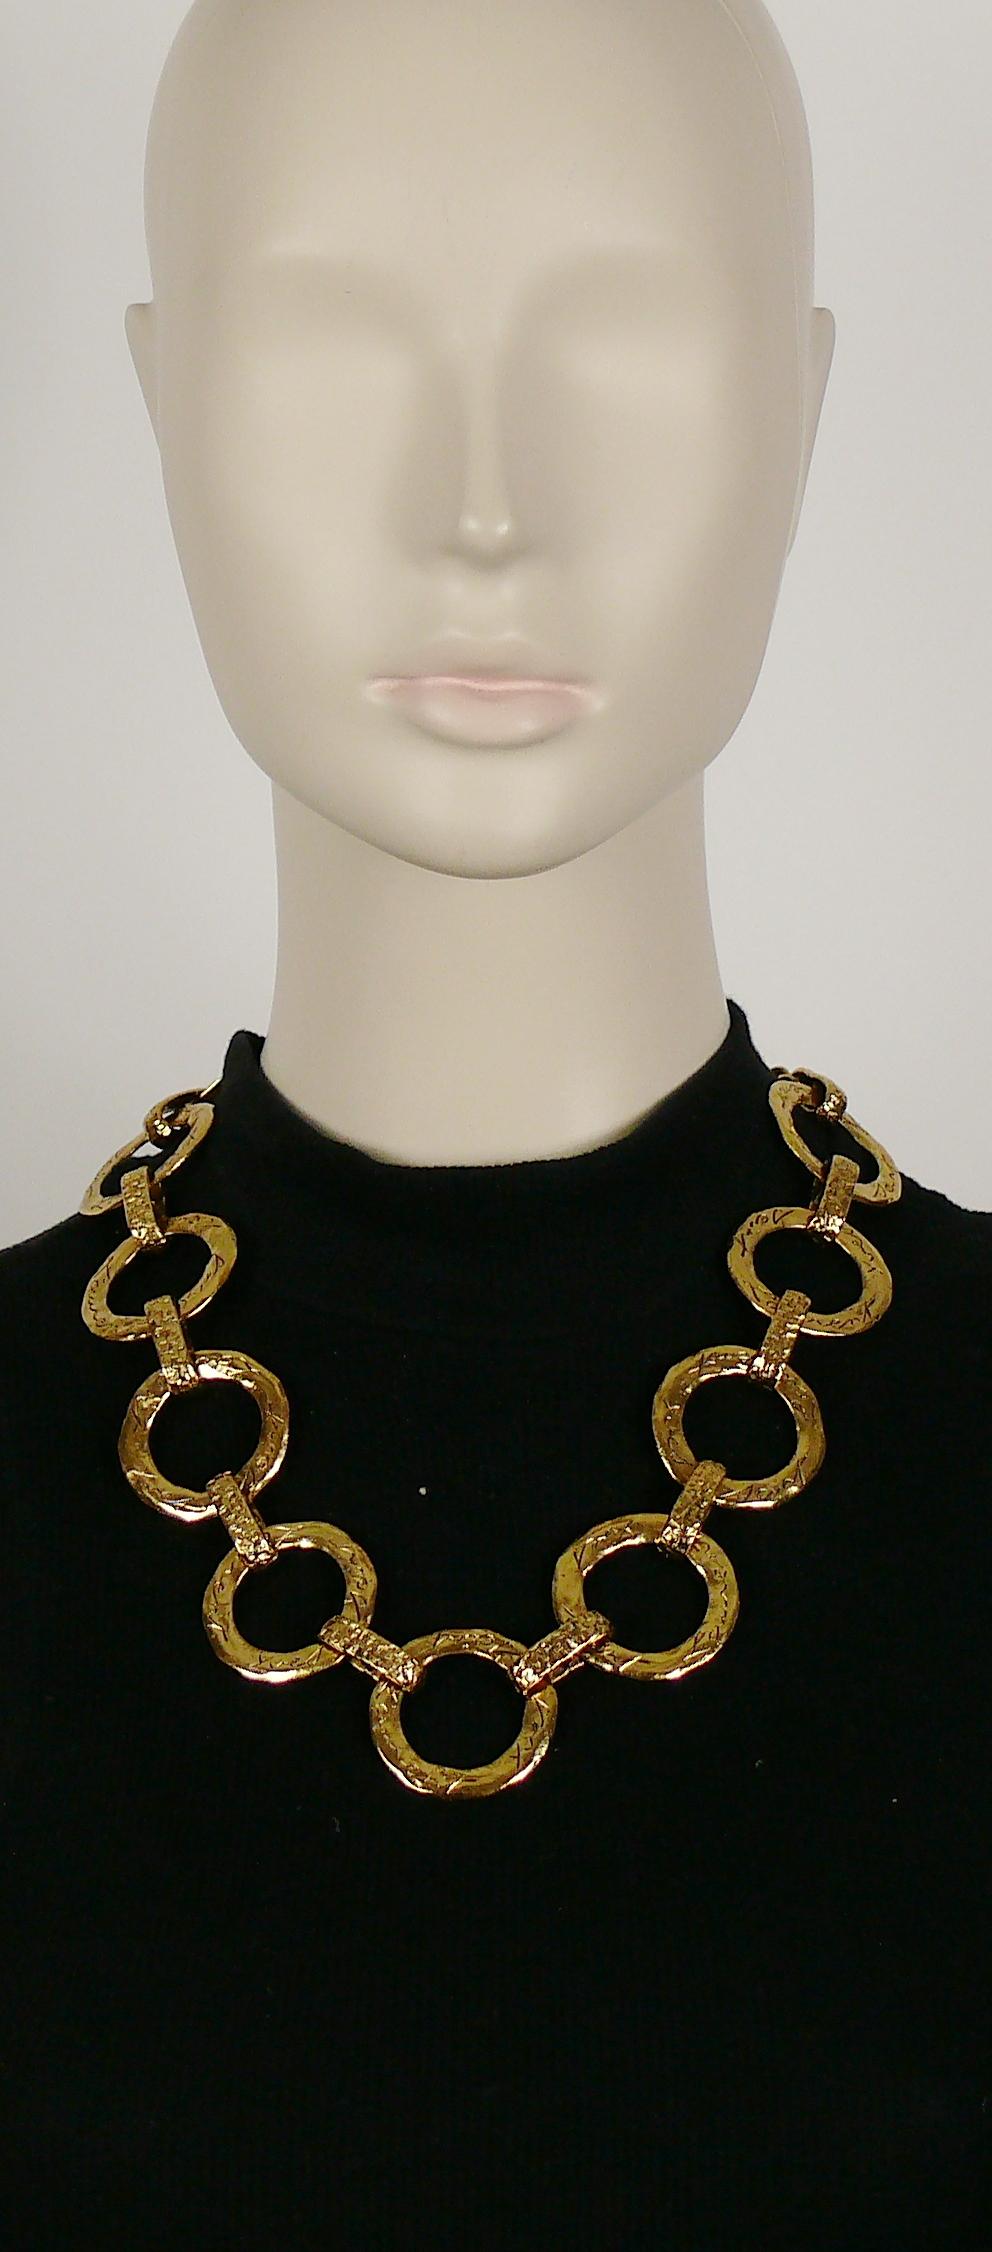 YVES SAINT LAURENT vintage gold toned necklace chunky textured circle links.

T bar and toggle closure.
Adjustable length.

Embossed YVES SAINT LAURENT cursive signature on the toggles.
Made in France.

Indicative mesaurements : adjustable length